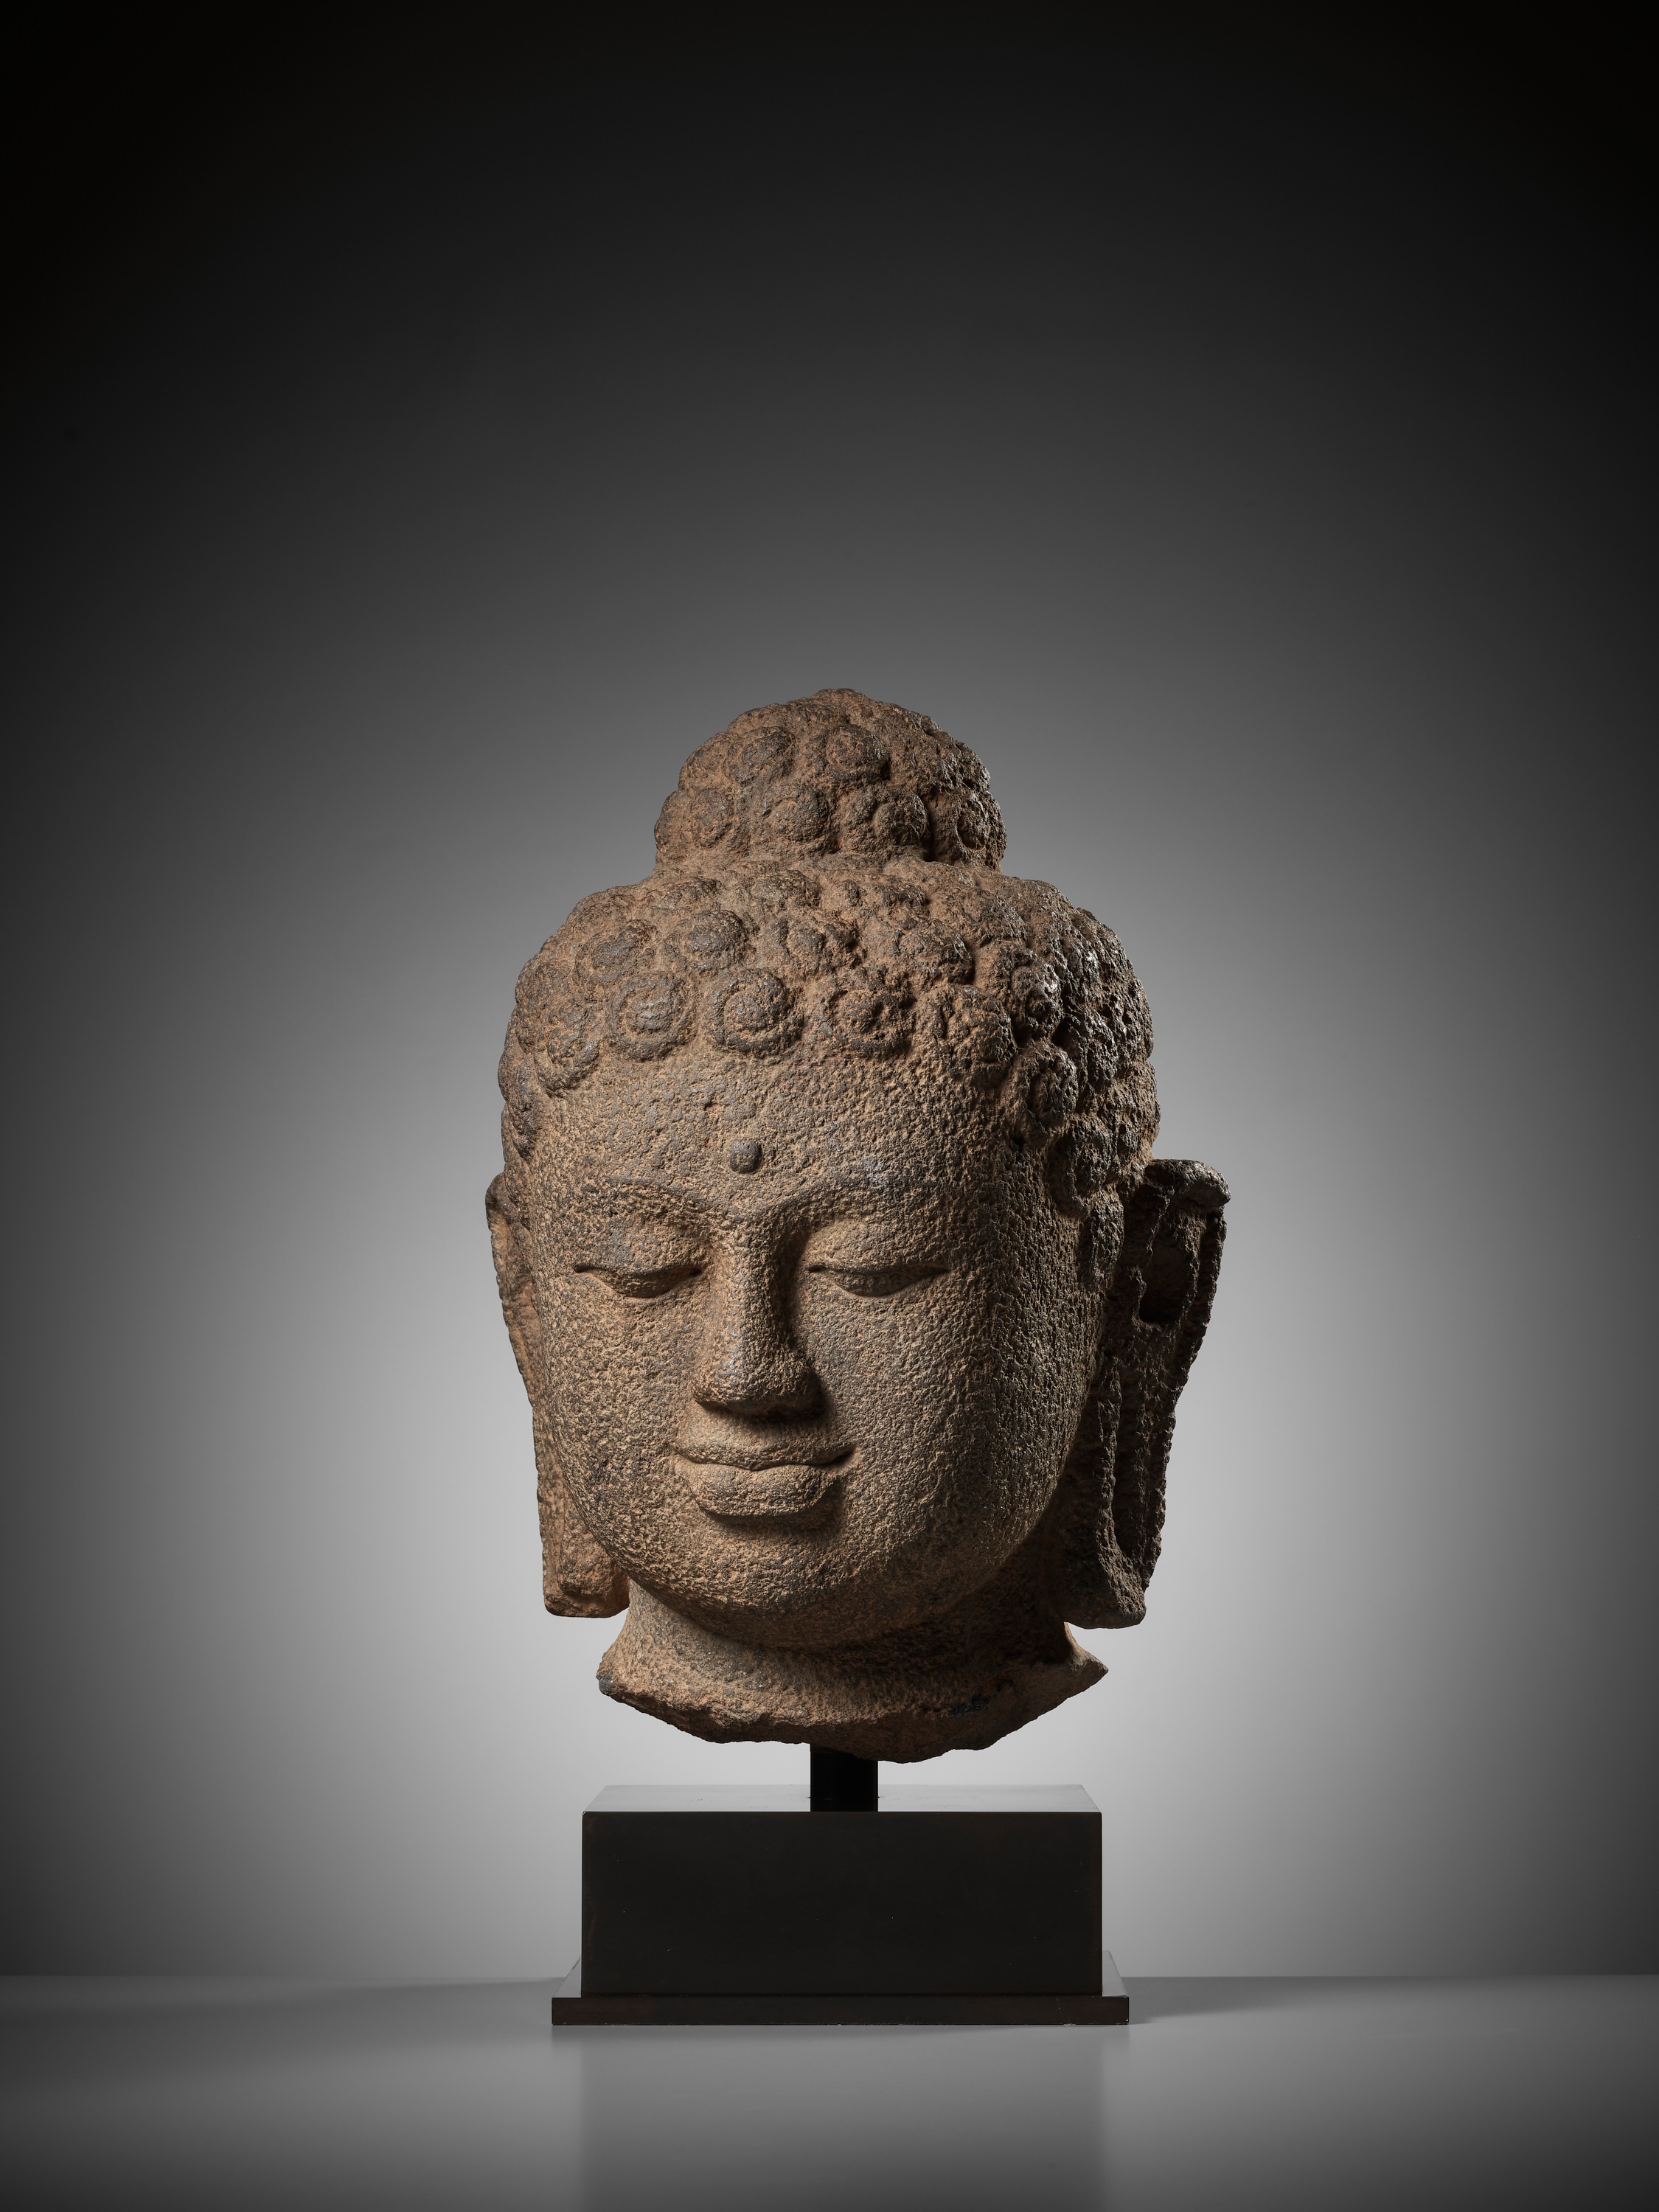 A LARGE ANDESITE HEAD OF BUDDHA, INDONESIA, CENTRAL JAVA, 9TH CENTURY - Image 7 of 10